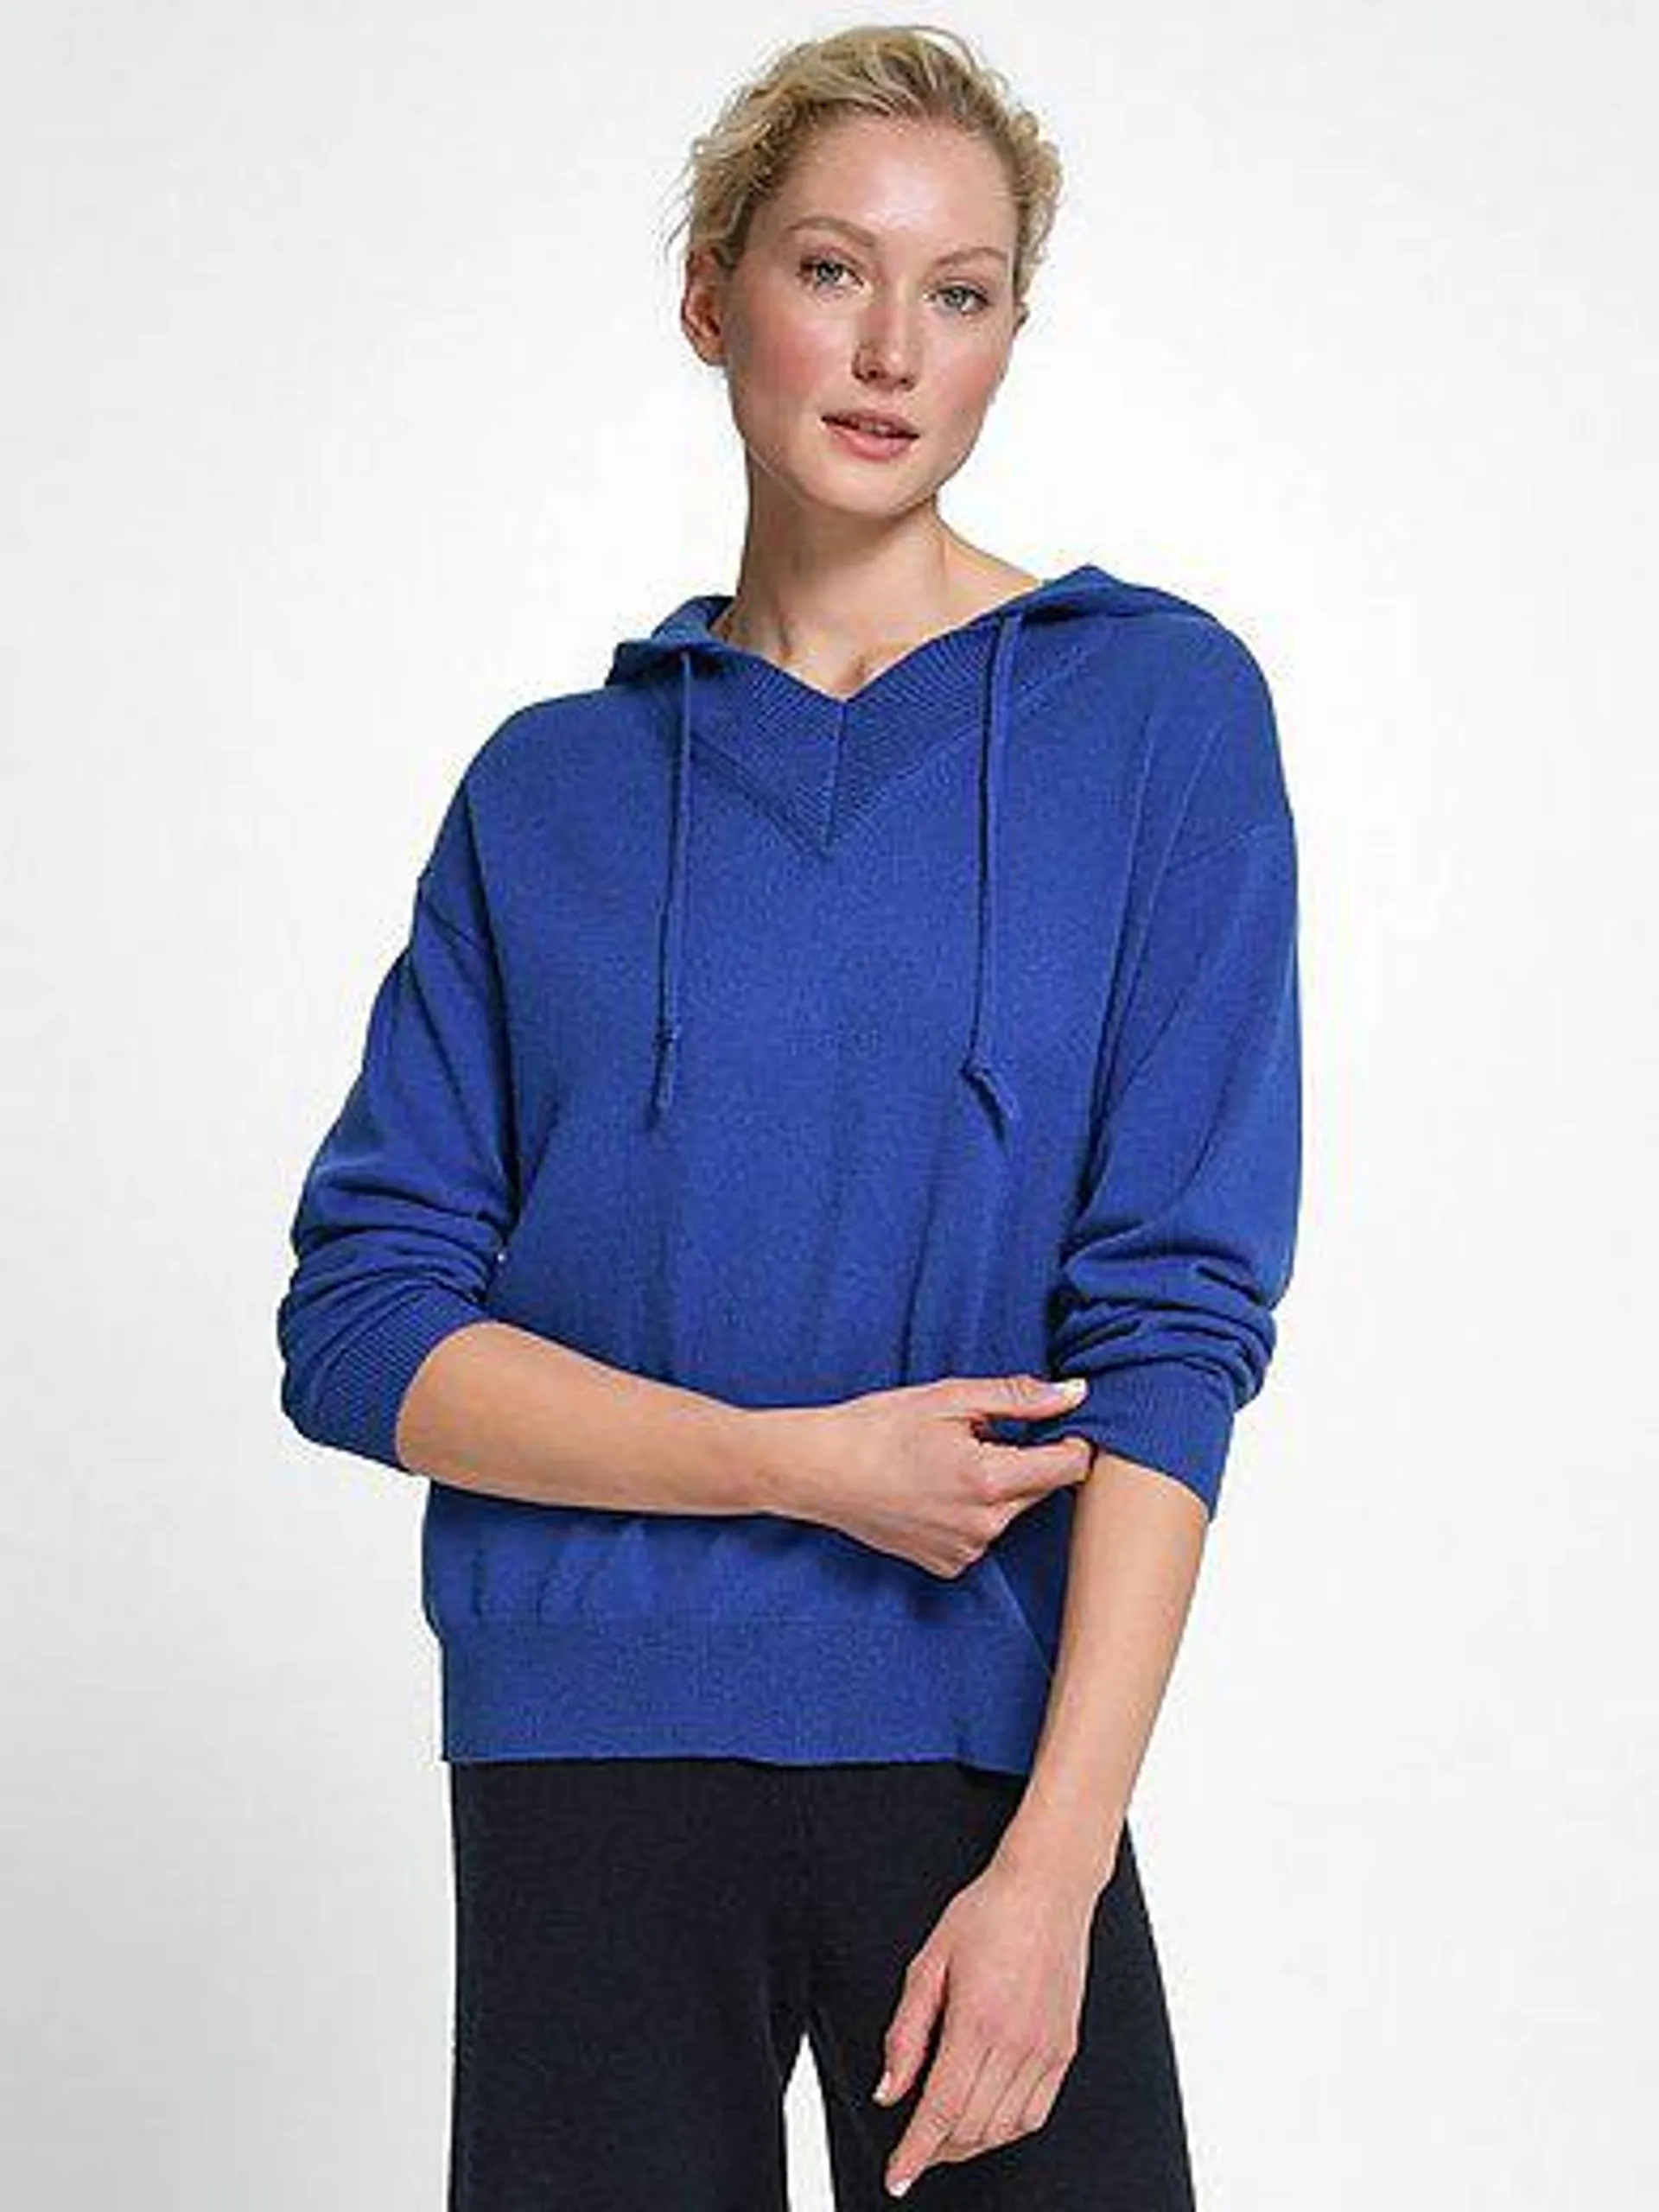 Hooded jumper made of pure new wool and cashmere